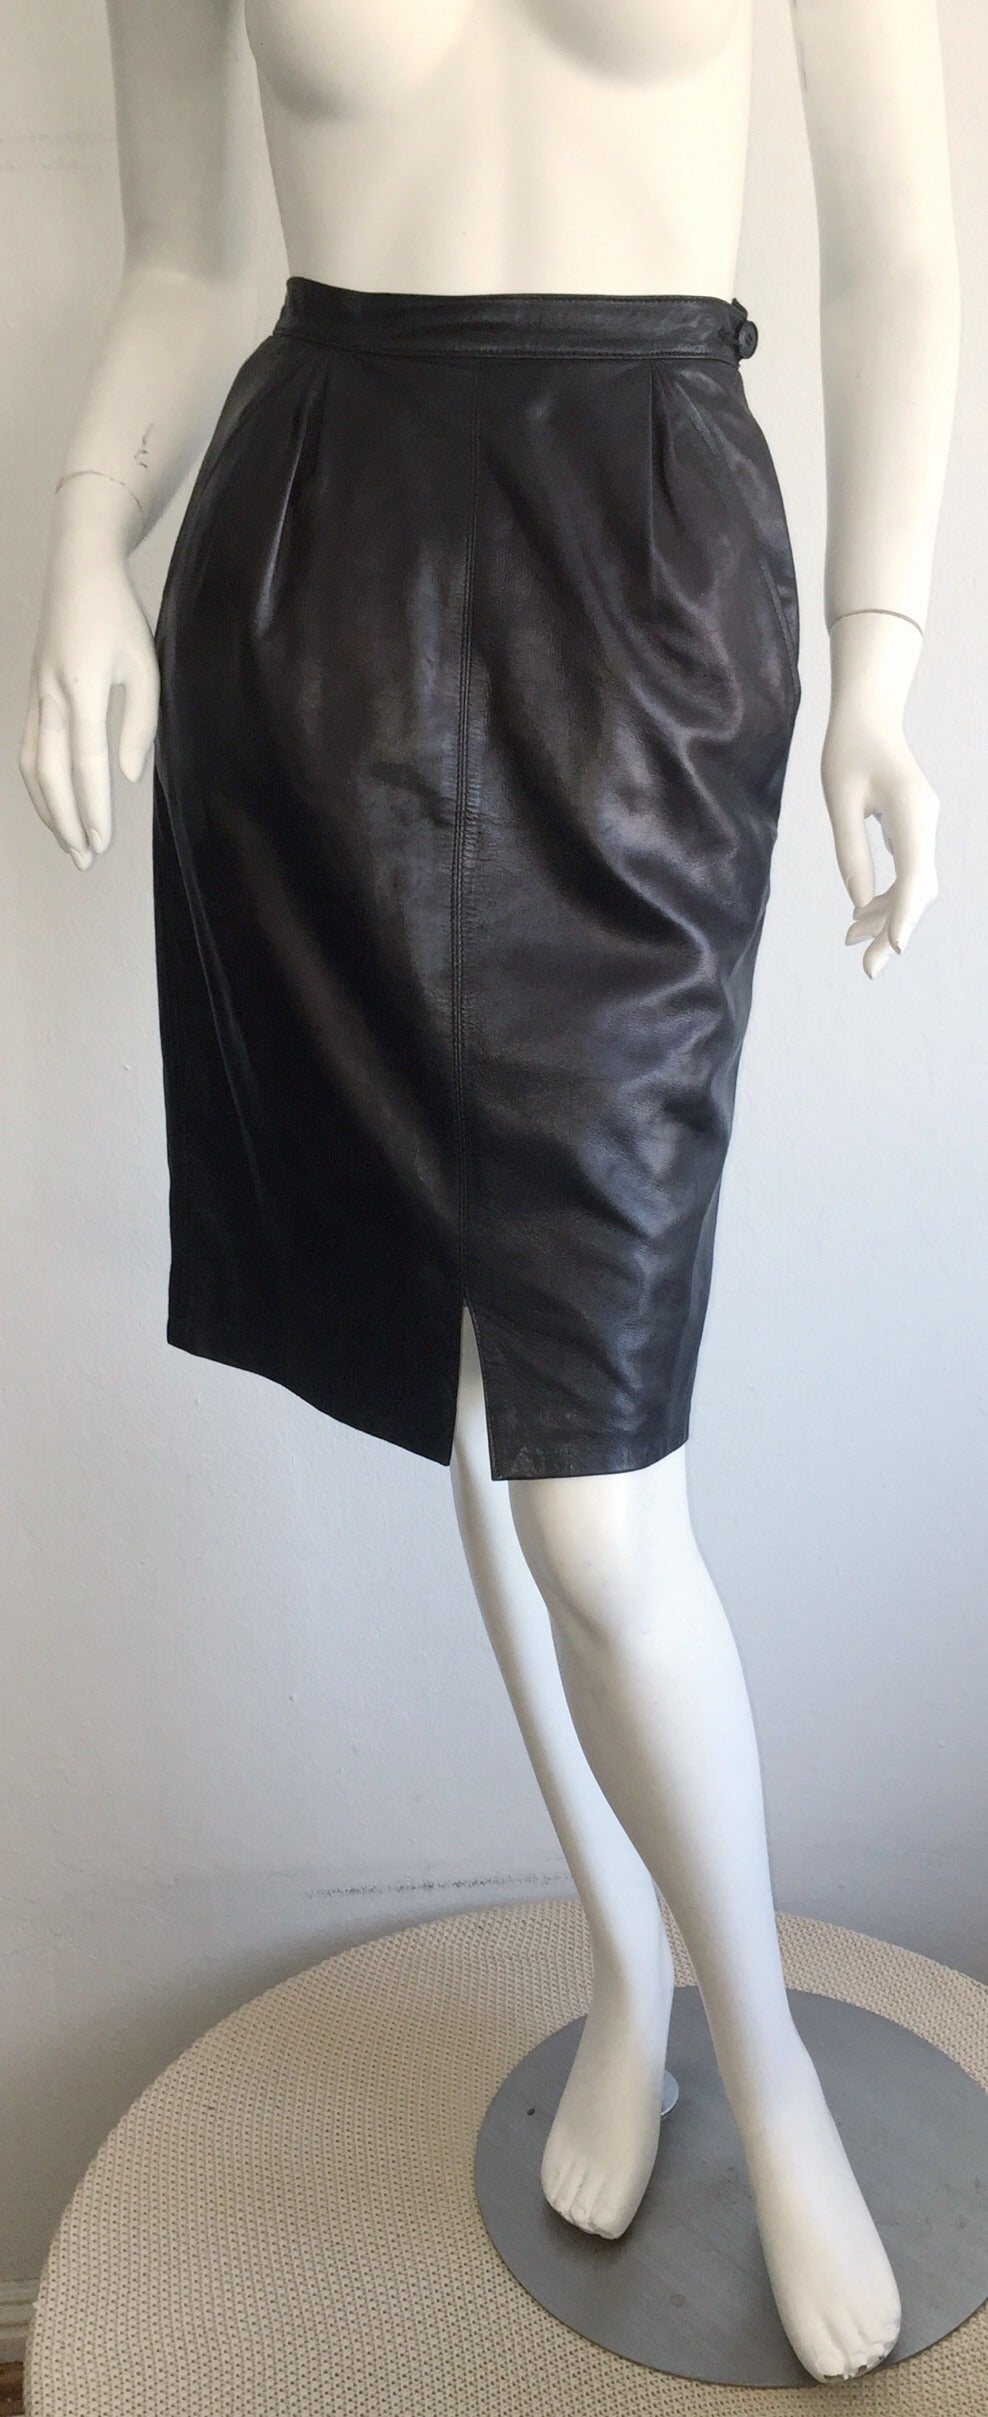 Sexy Vintage Yves Saint Laurent Leather High Waisted Black Pencil Skirt In Excellent Condition For Sale In San Diego, CA